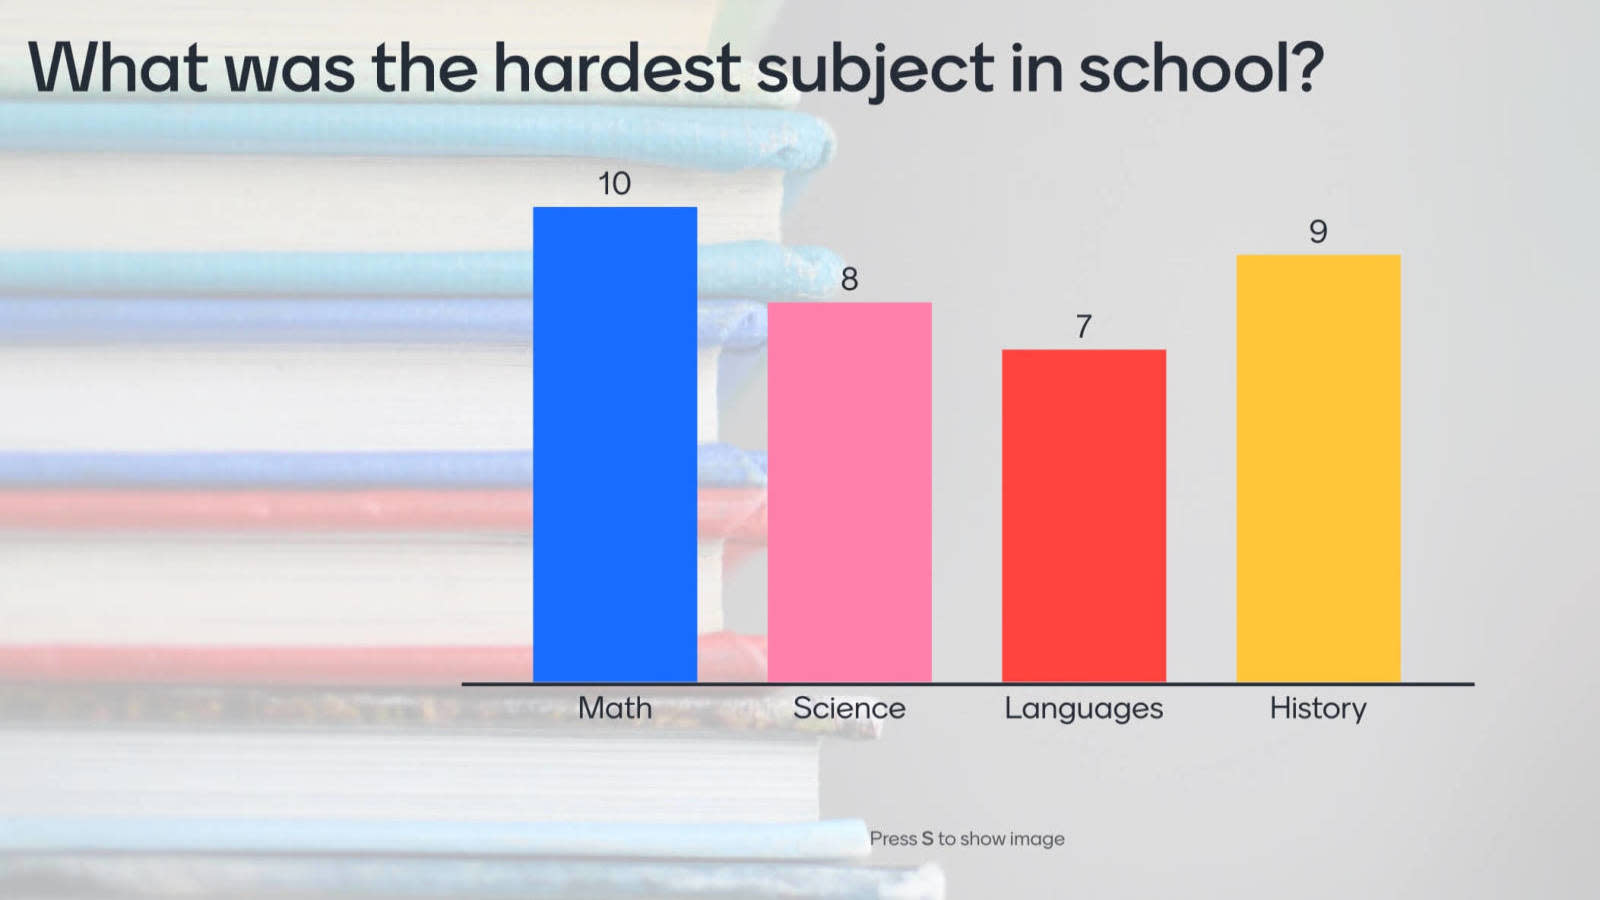 What was the hardest subject in school?